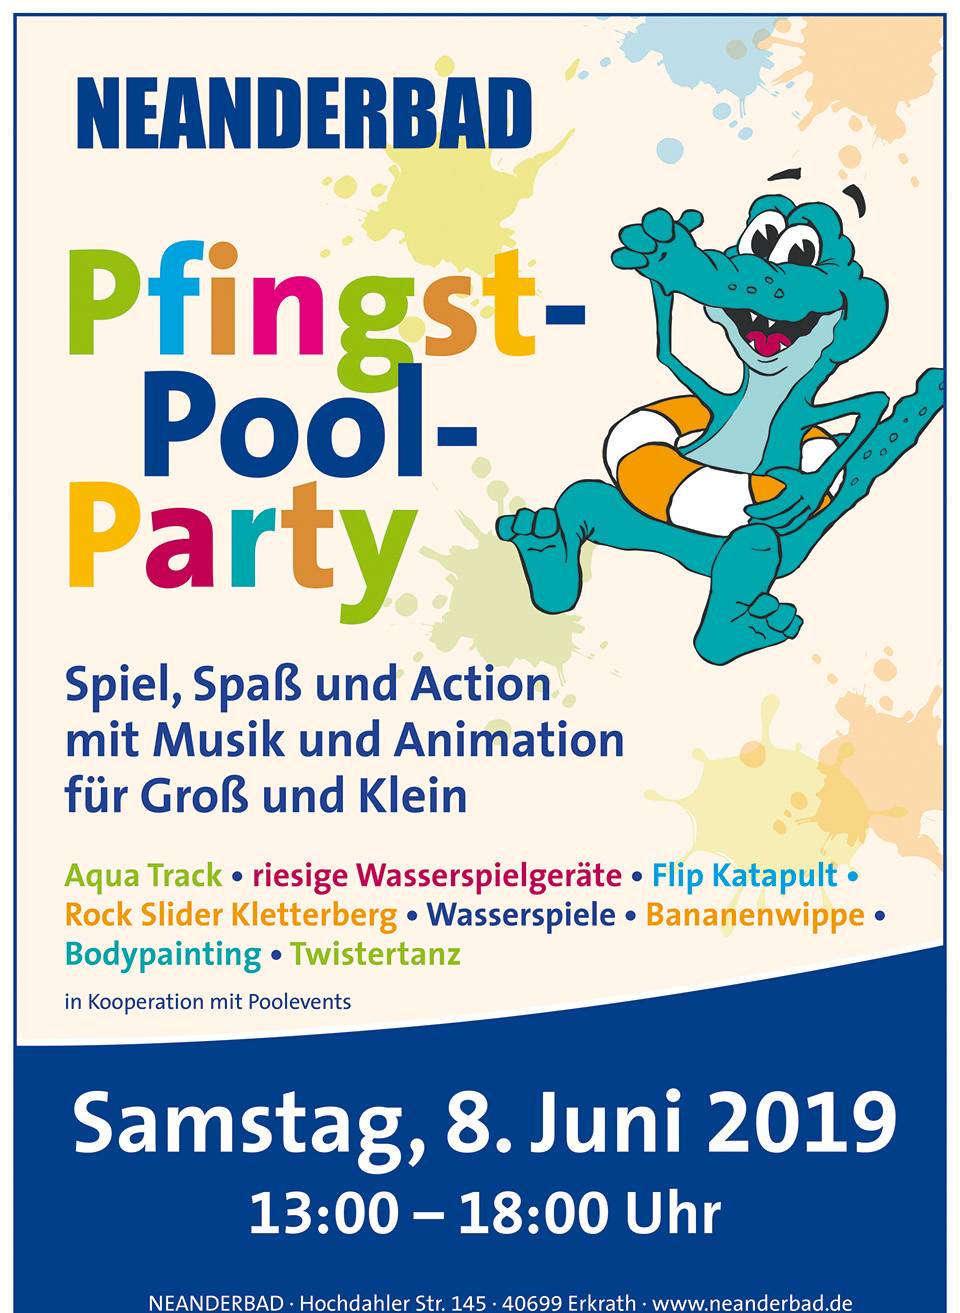 Auf ins Neanderbad: Pool-Party an Pfingsten